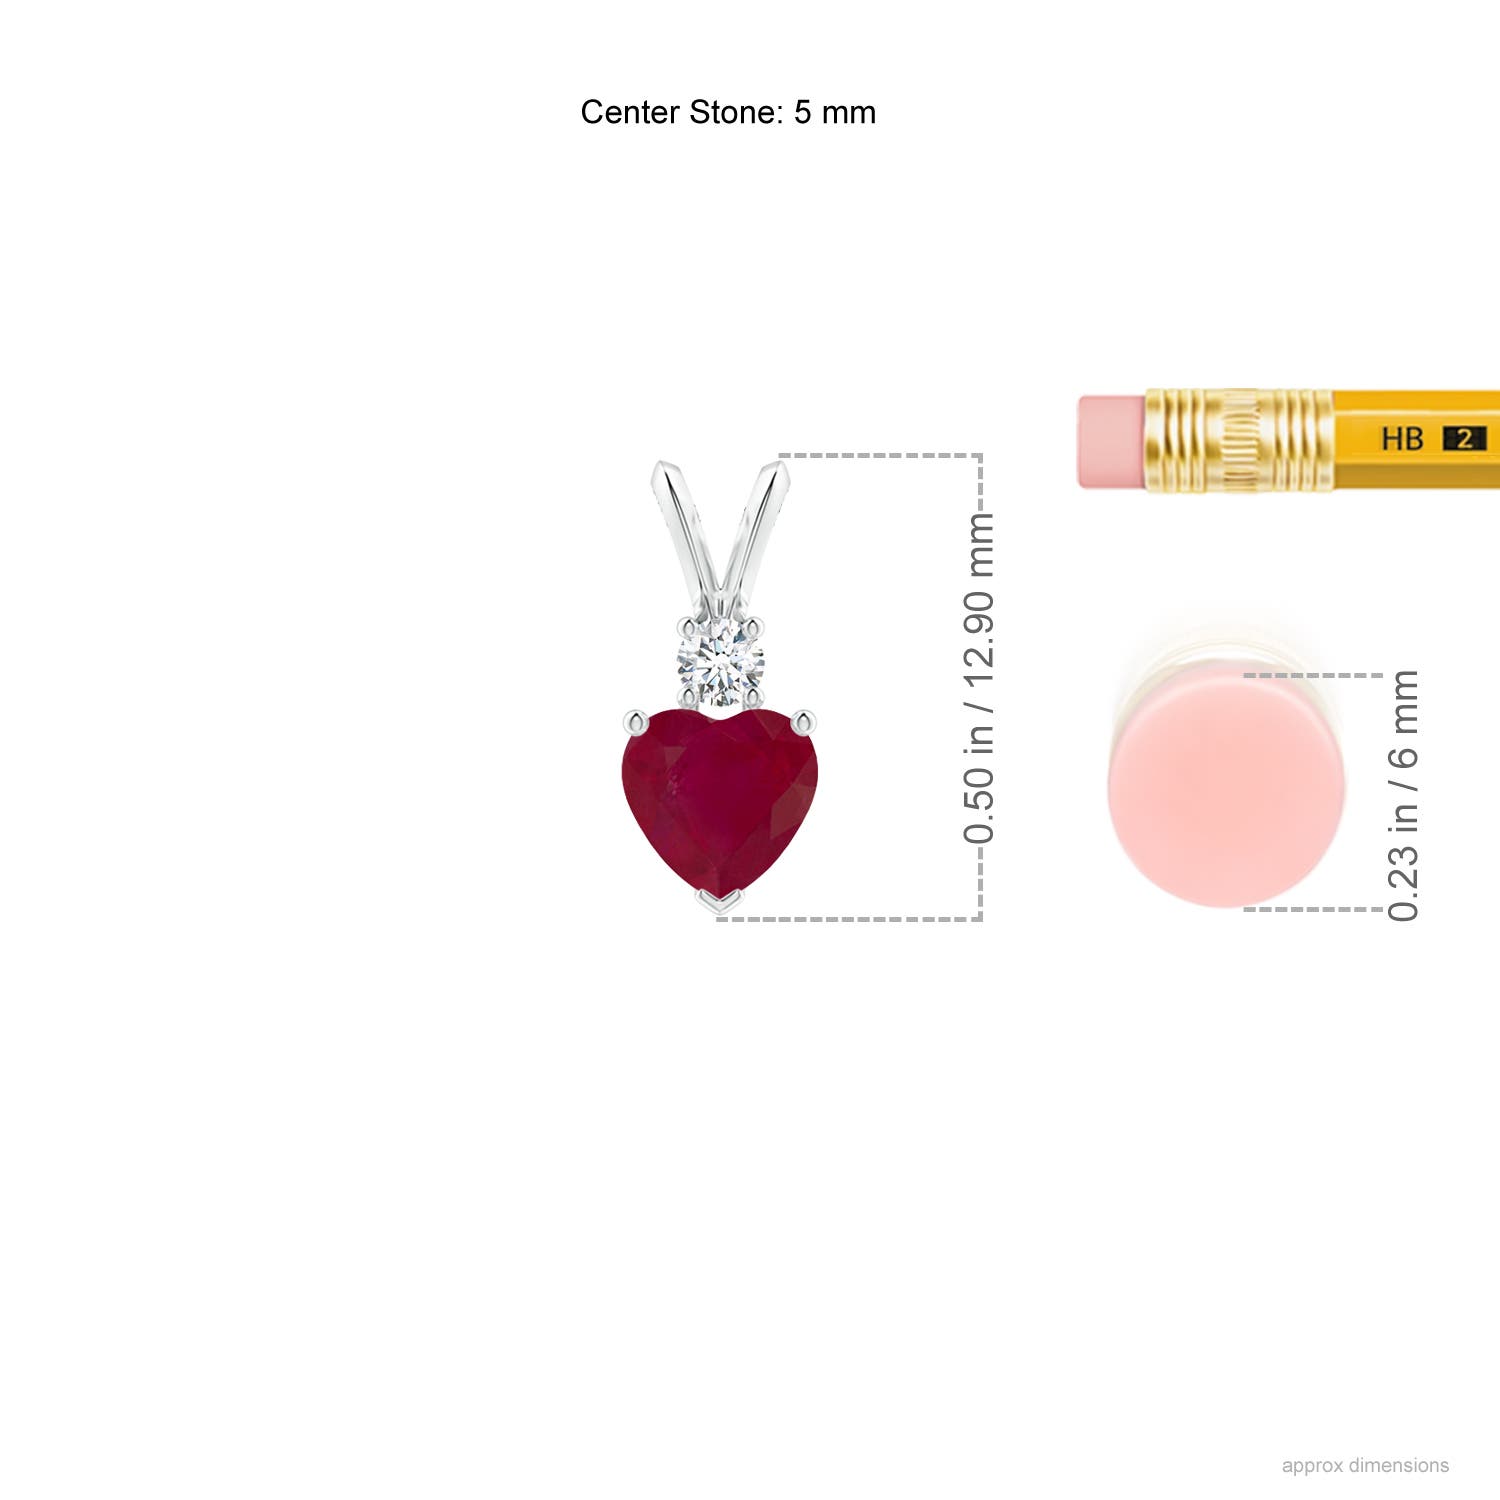 A - Ruby / 0.59 CT / 14 KT White Gold